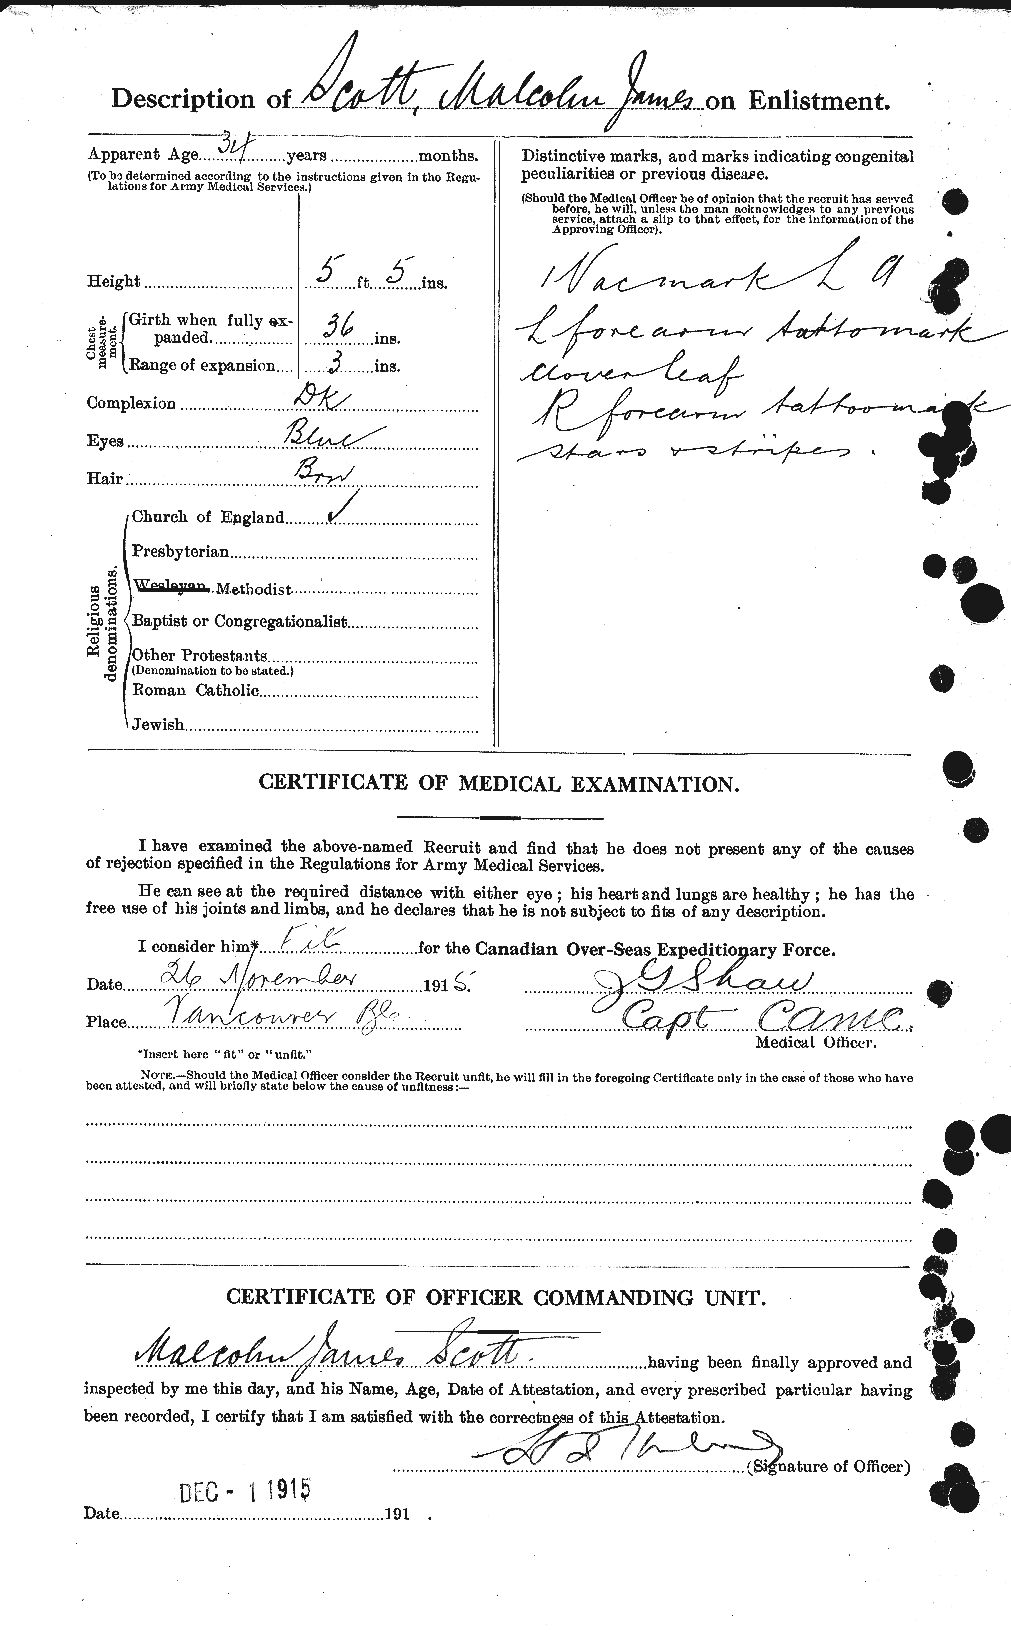 Personnel Records of the First World War - CEF 083517b